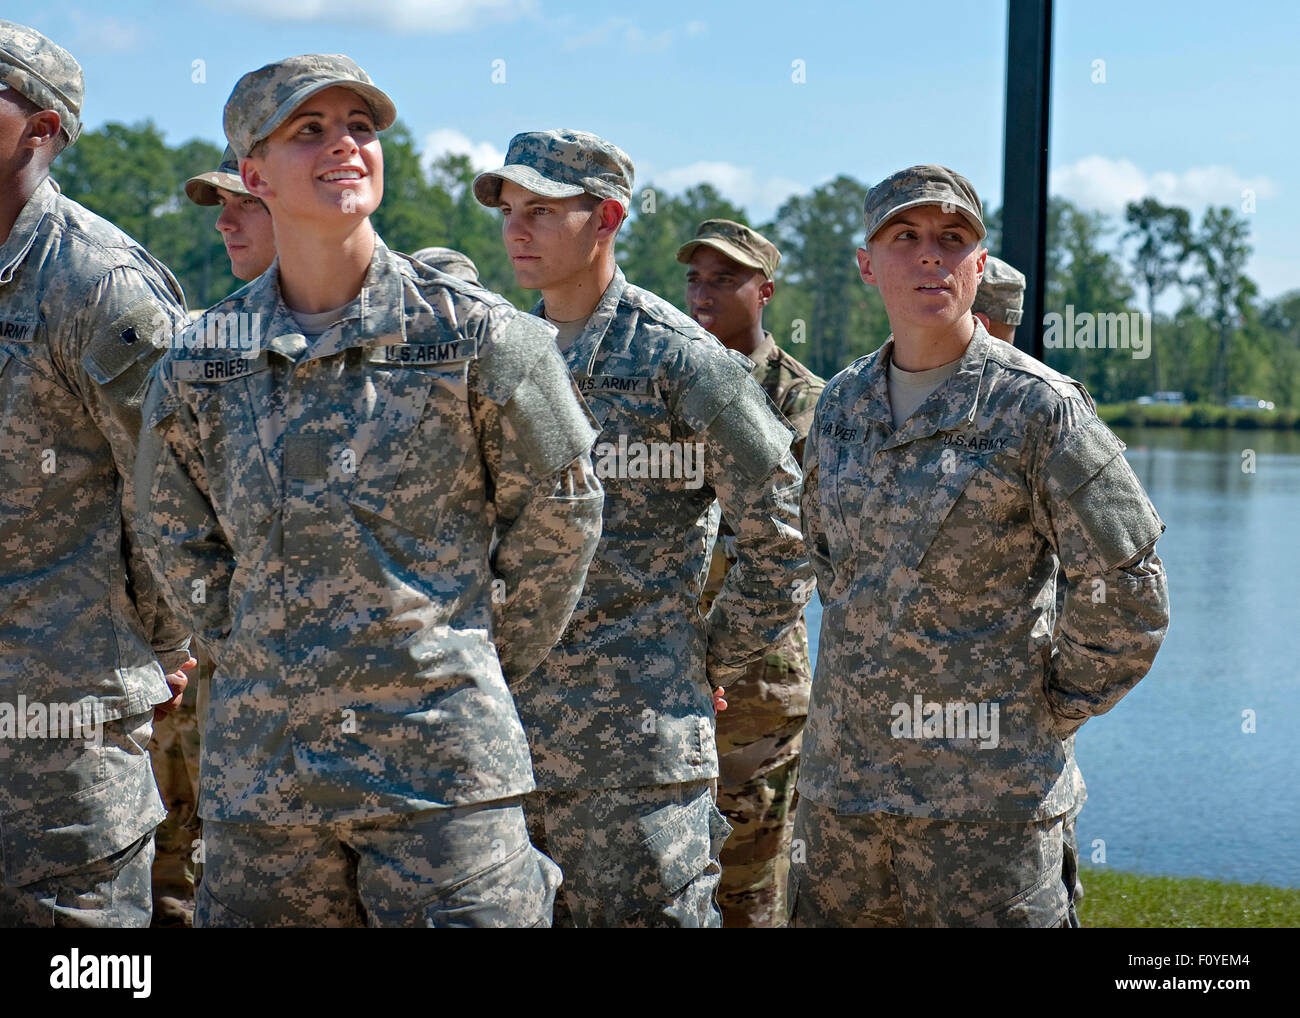 U.S. Army Captain Kristen Griest, left, and fellow soldier 1st Lt. Shaye Haver look toward cheering friends after becoming the first women to graduate from Army Ranger school August 21, 2015 at Fort Benning, Georgia. Stock Photo